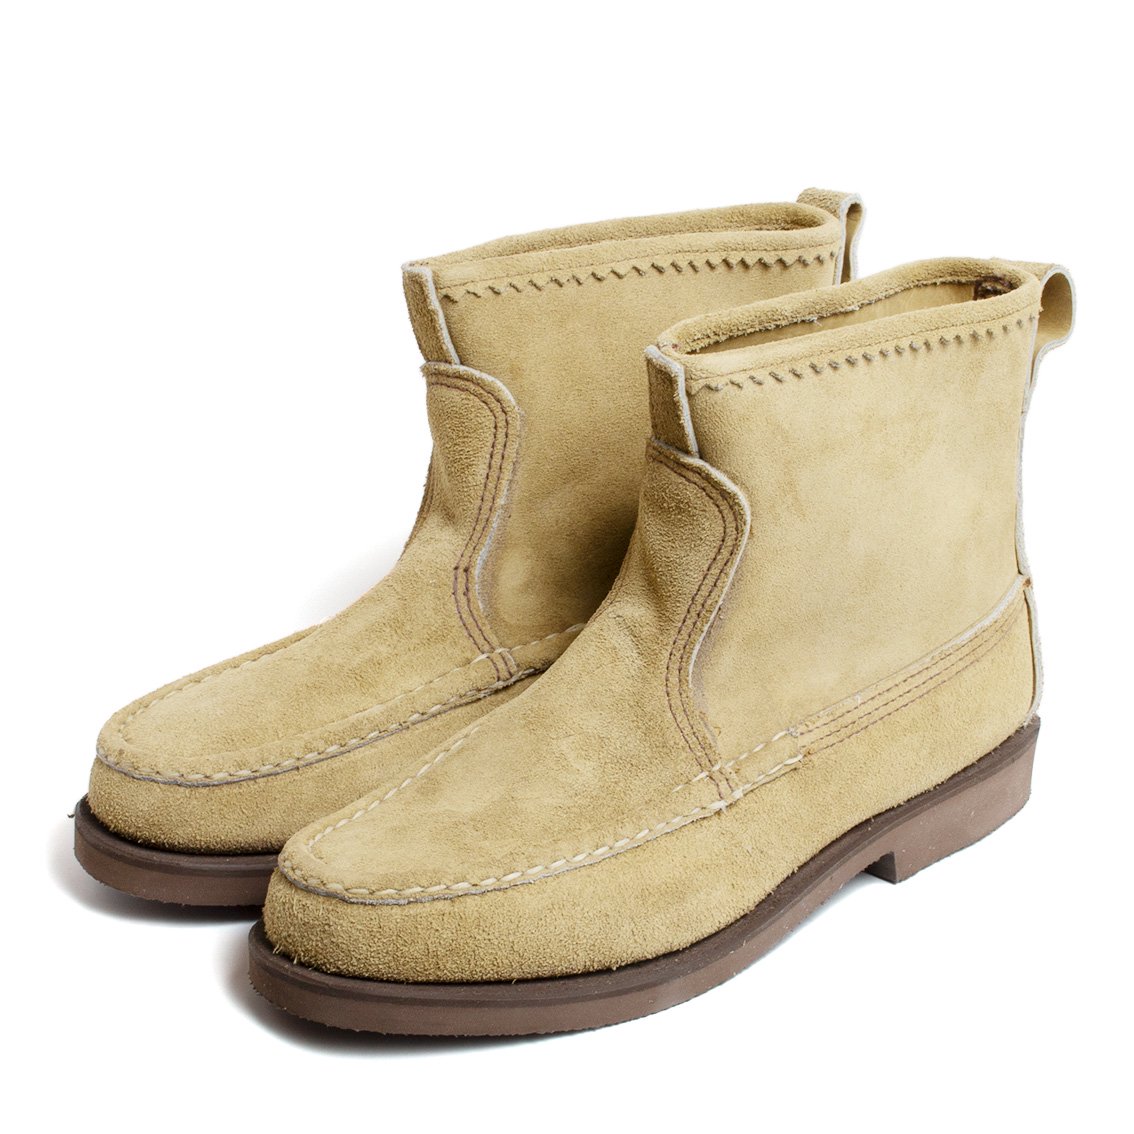 RUSSELL MOCCASIN / ラッセルモカシン] Knock-A-Bout Boot ノック 